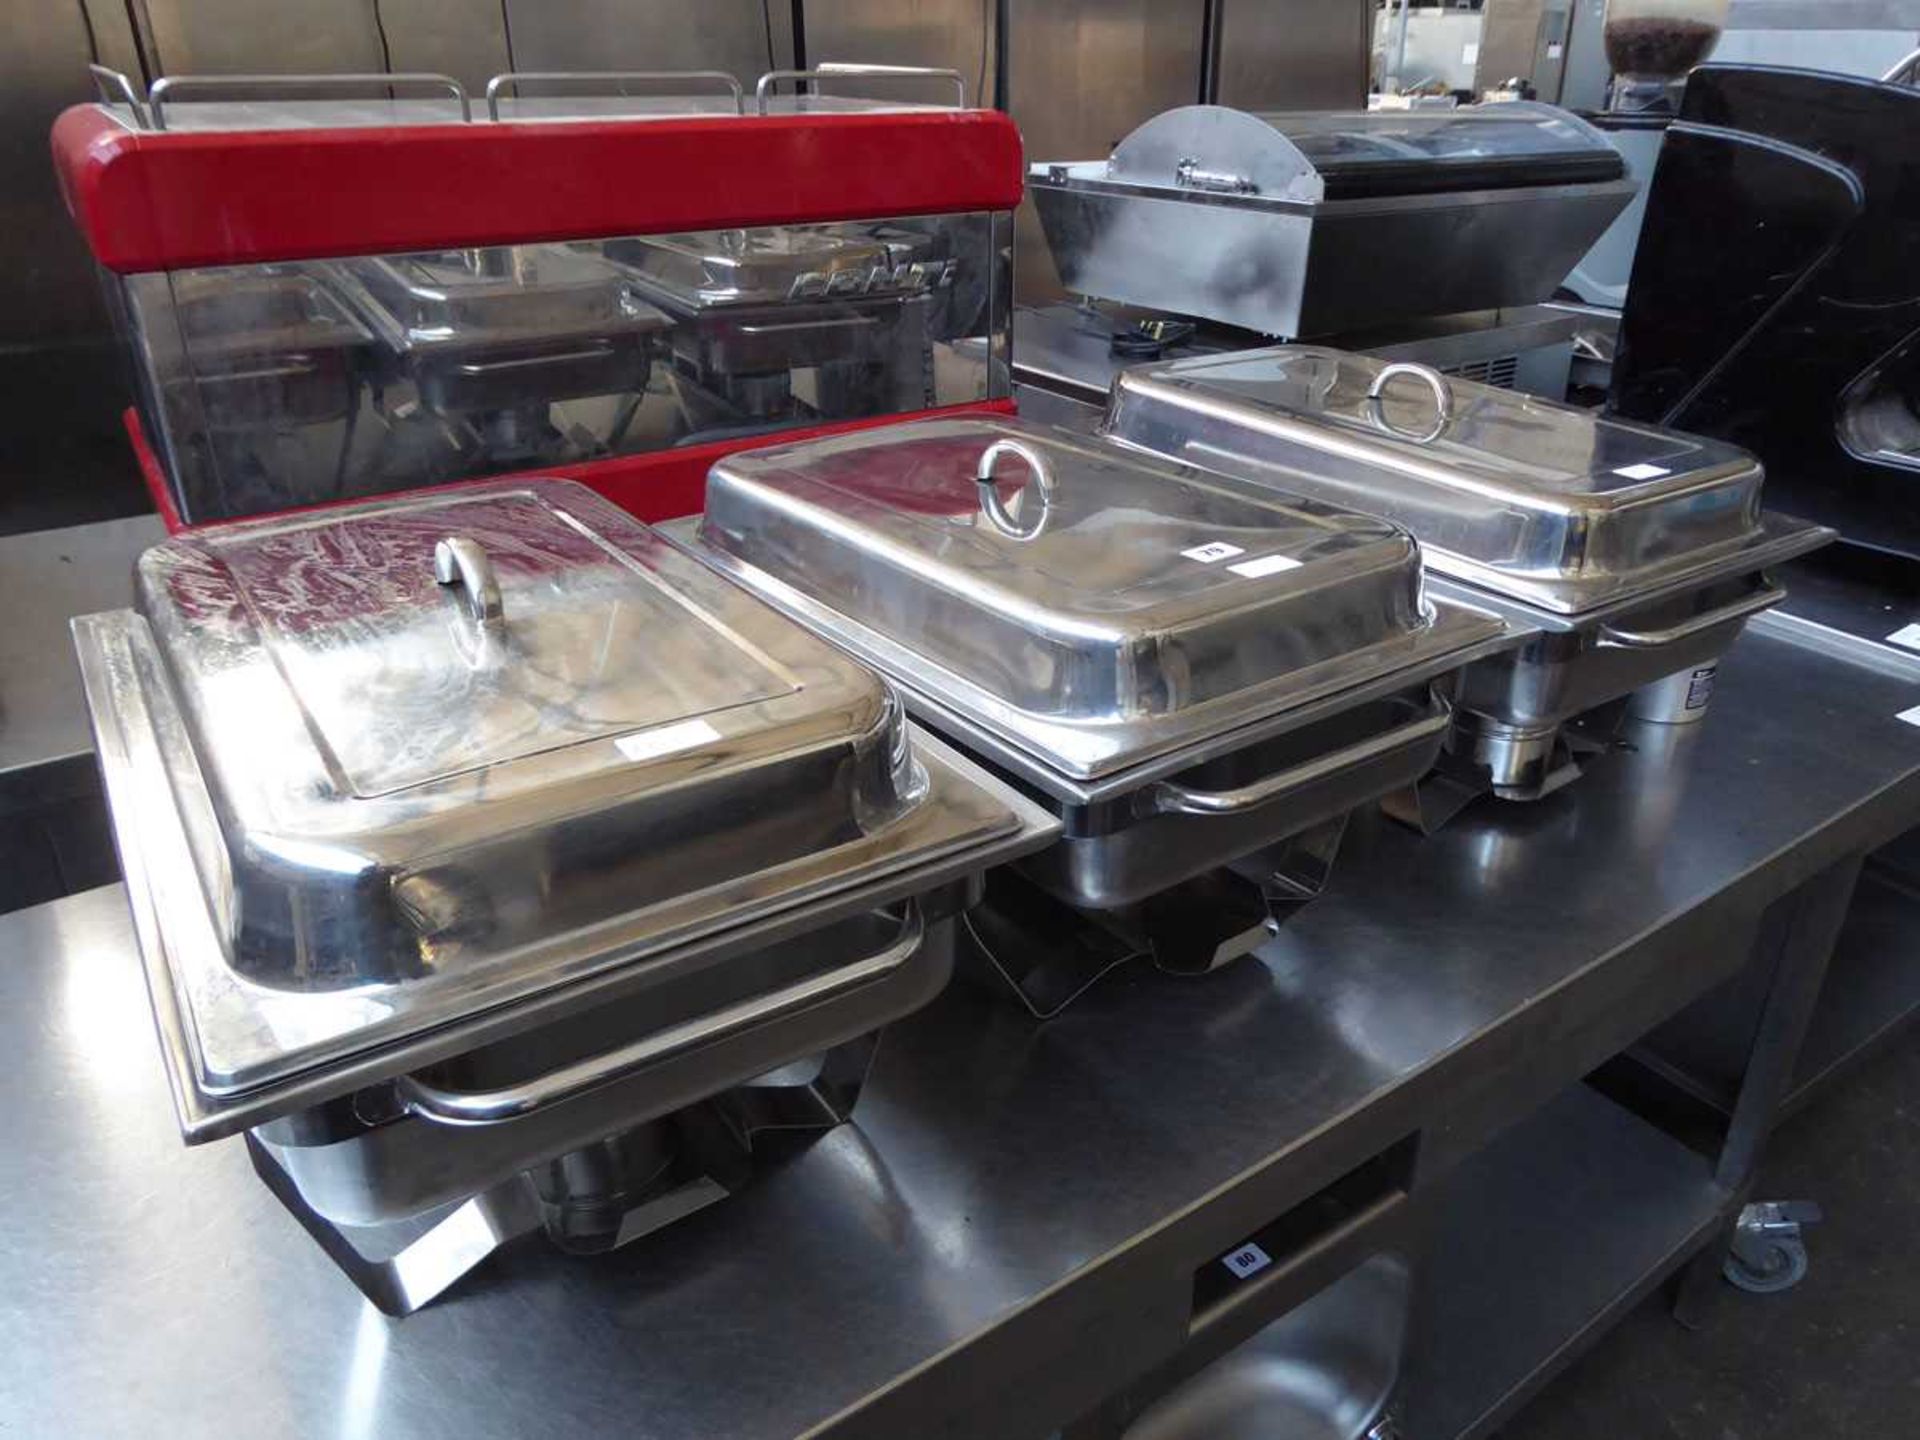 3 chafing dishes with bain-maries, lids and gel chafing fuel